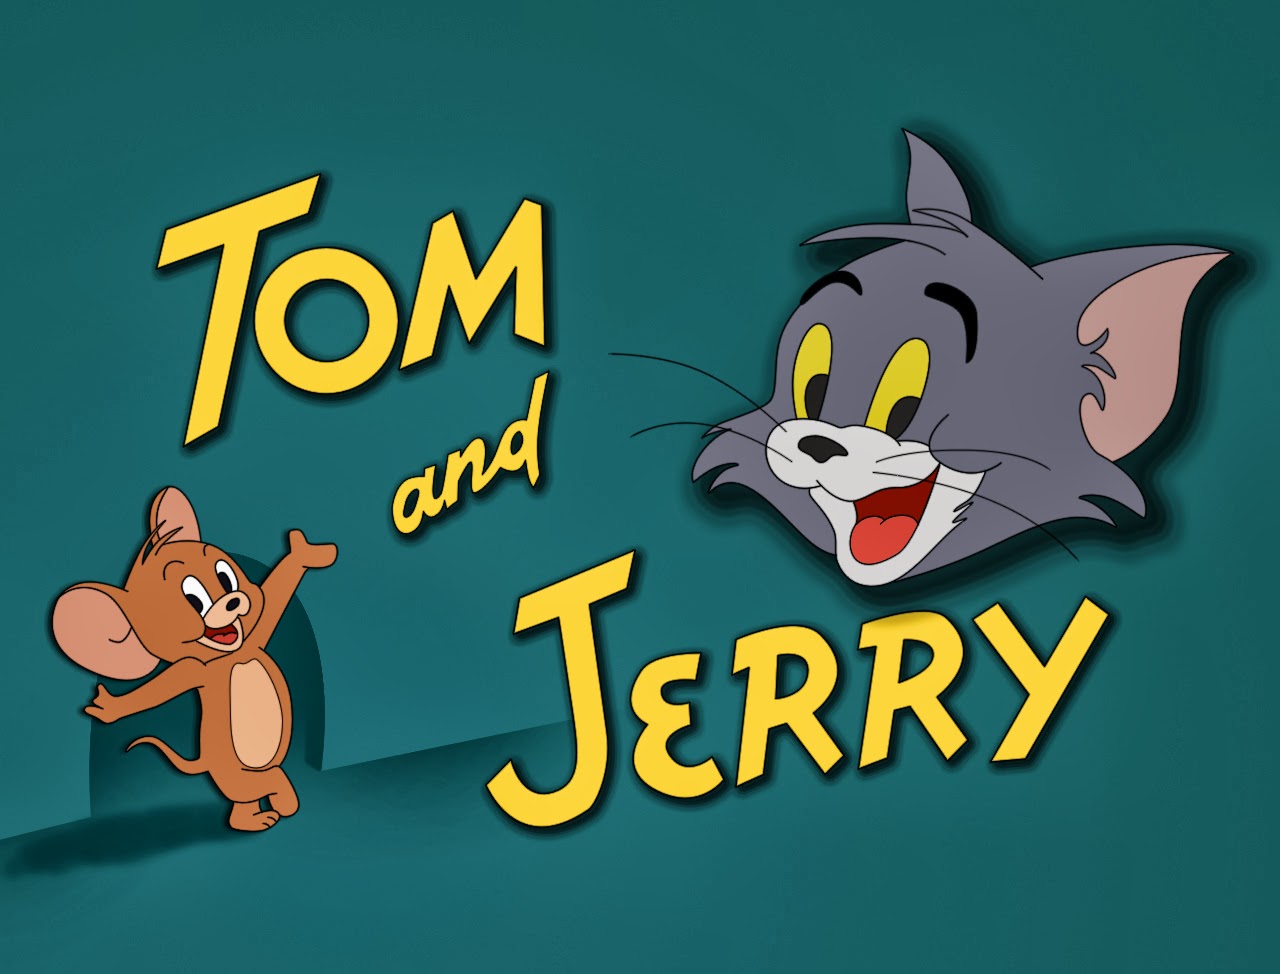 Tom and Jerry free wallpapers picture, Tom and Jerry free ...